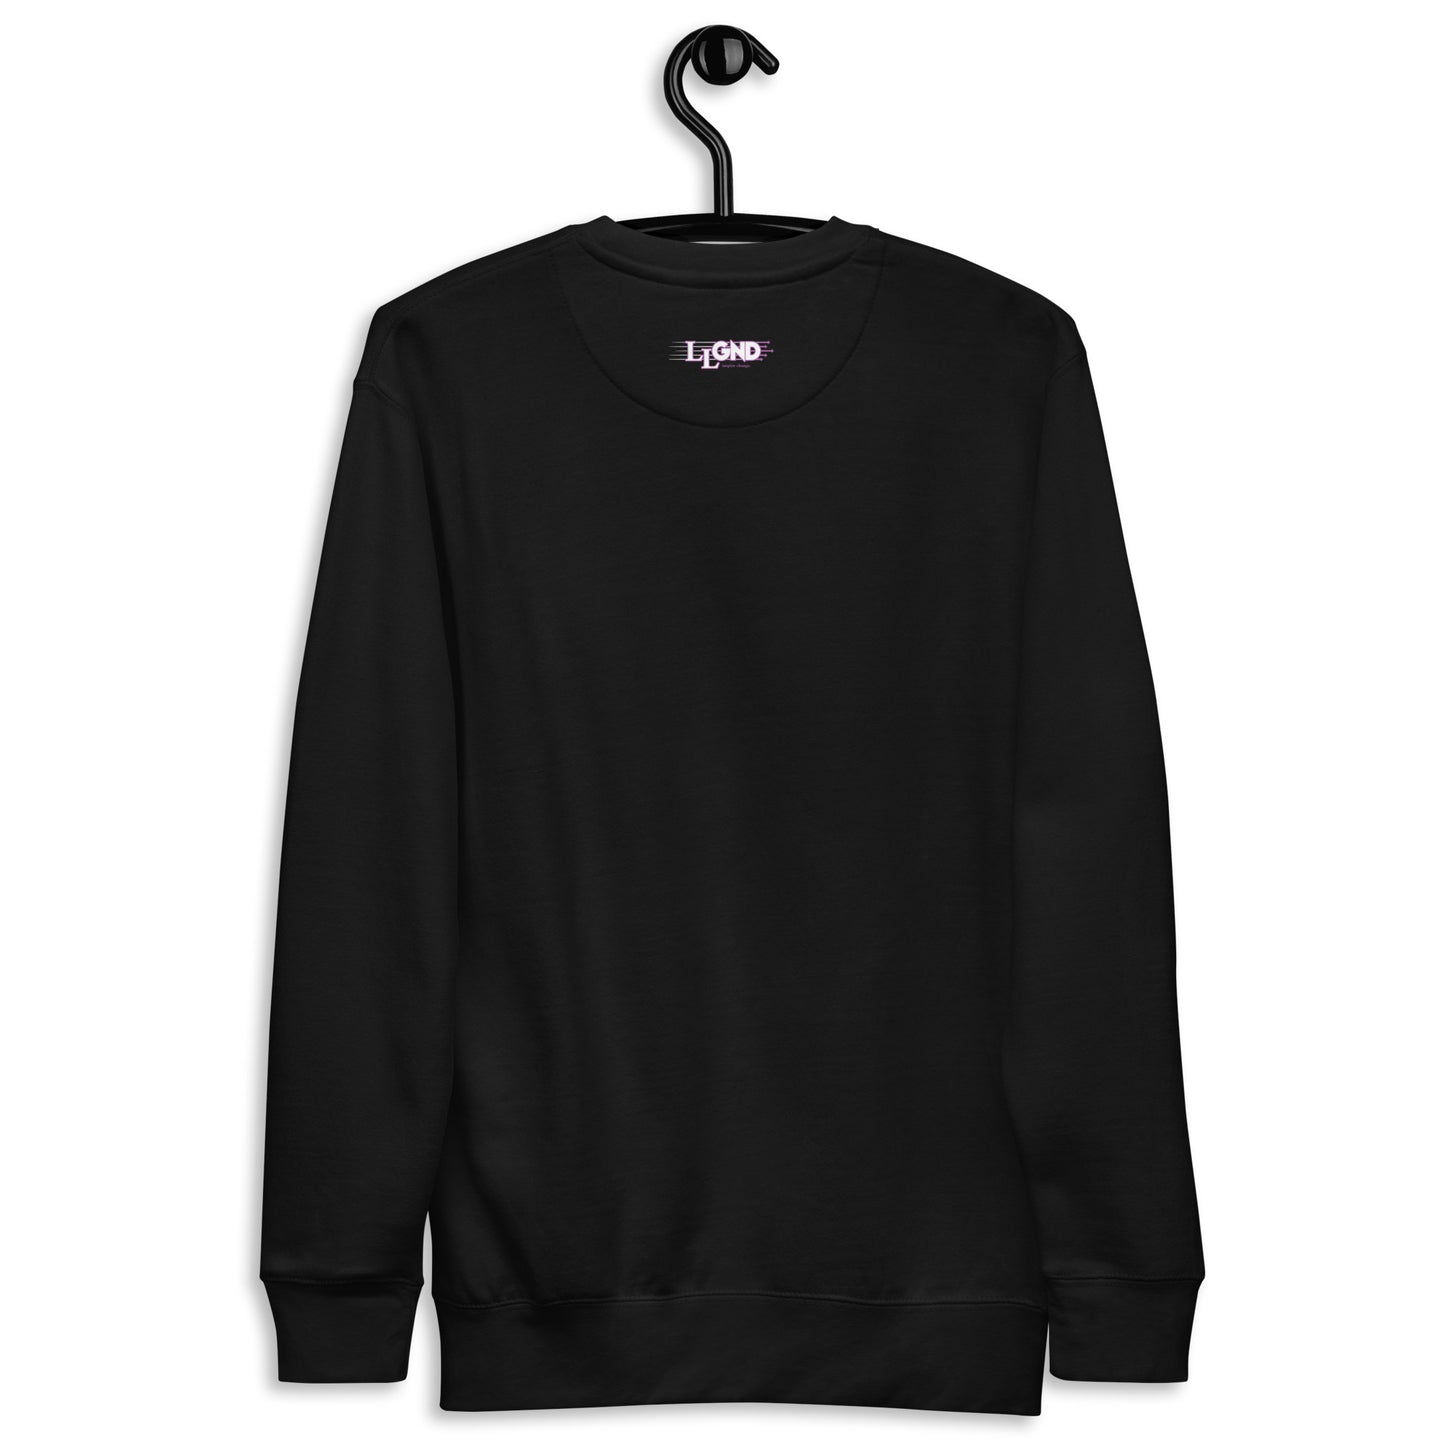 DYNASTY EMBROIDERED CREWNECK